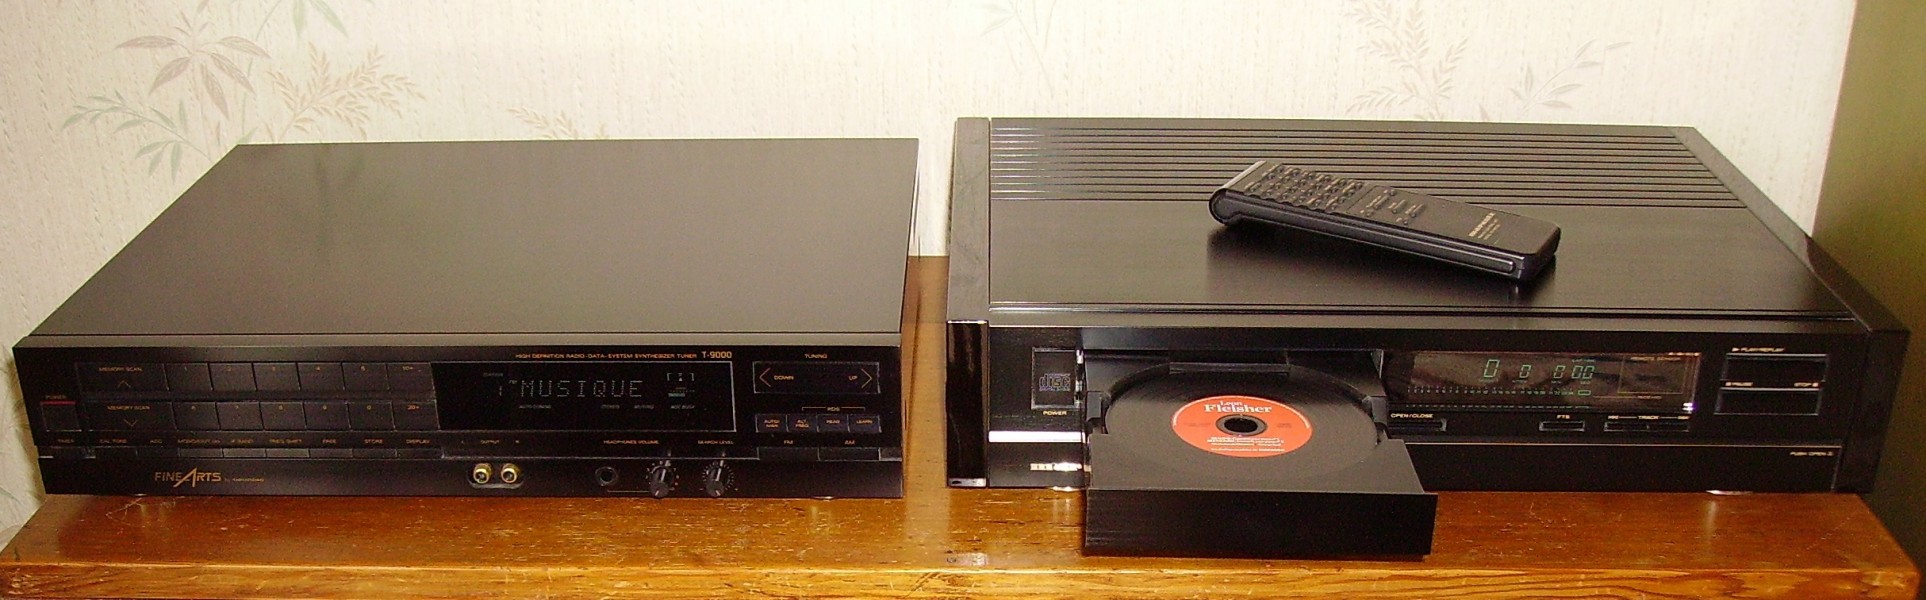 Hifi sources-Tuner and CD player